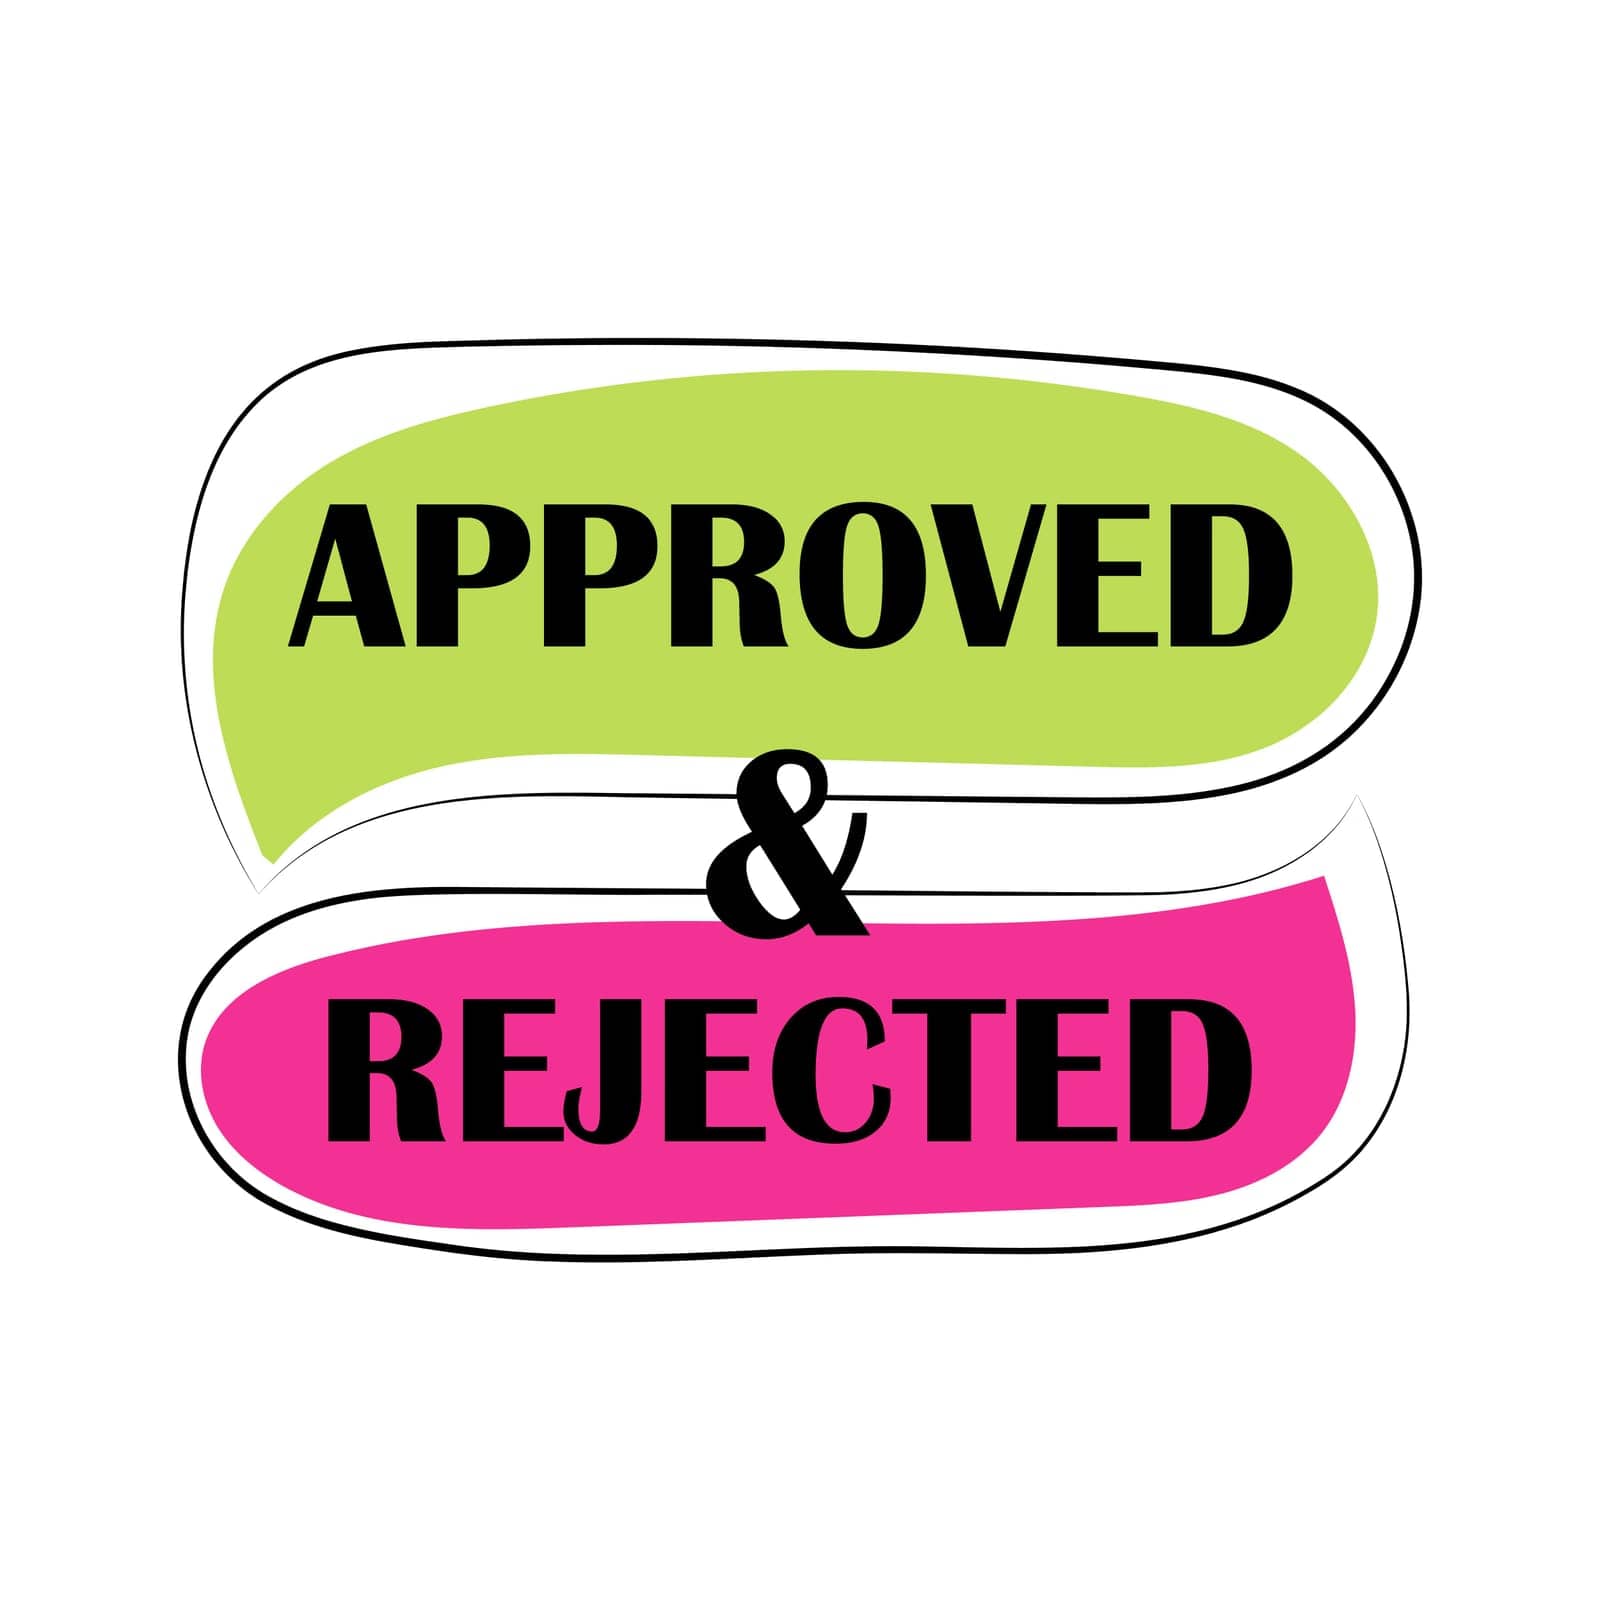 Choice approved or rejected. Quiz elements.